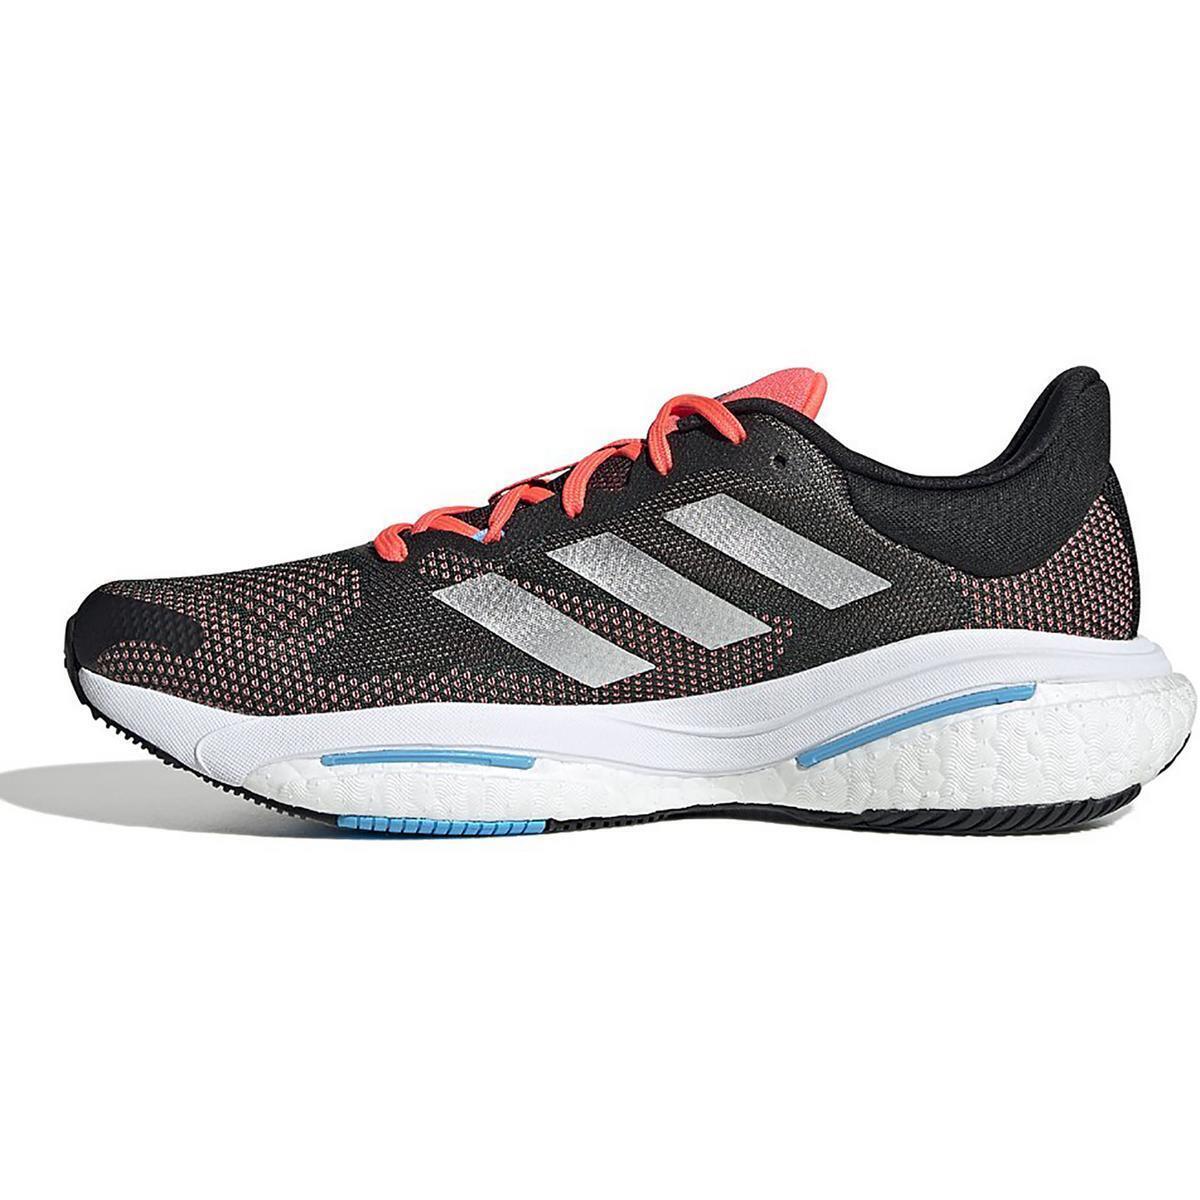 Adidas Mens Solar Glide 5 M Fitness Running Training Shoes Sneakers Bhfo 3828 - Carbon Silver/Silver Metallic